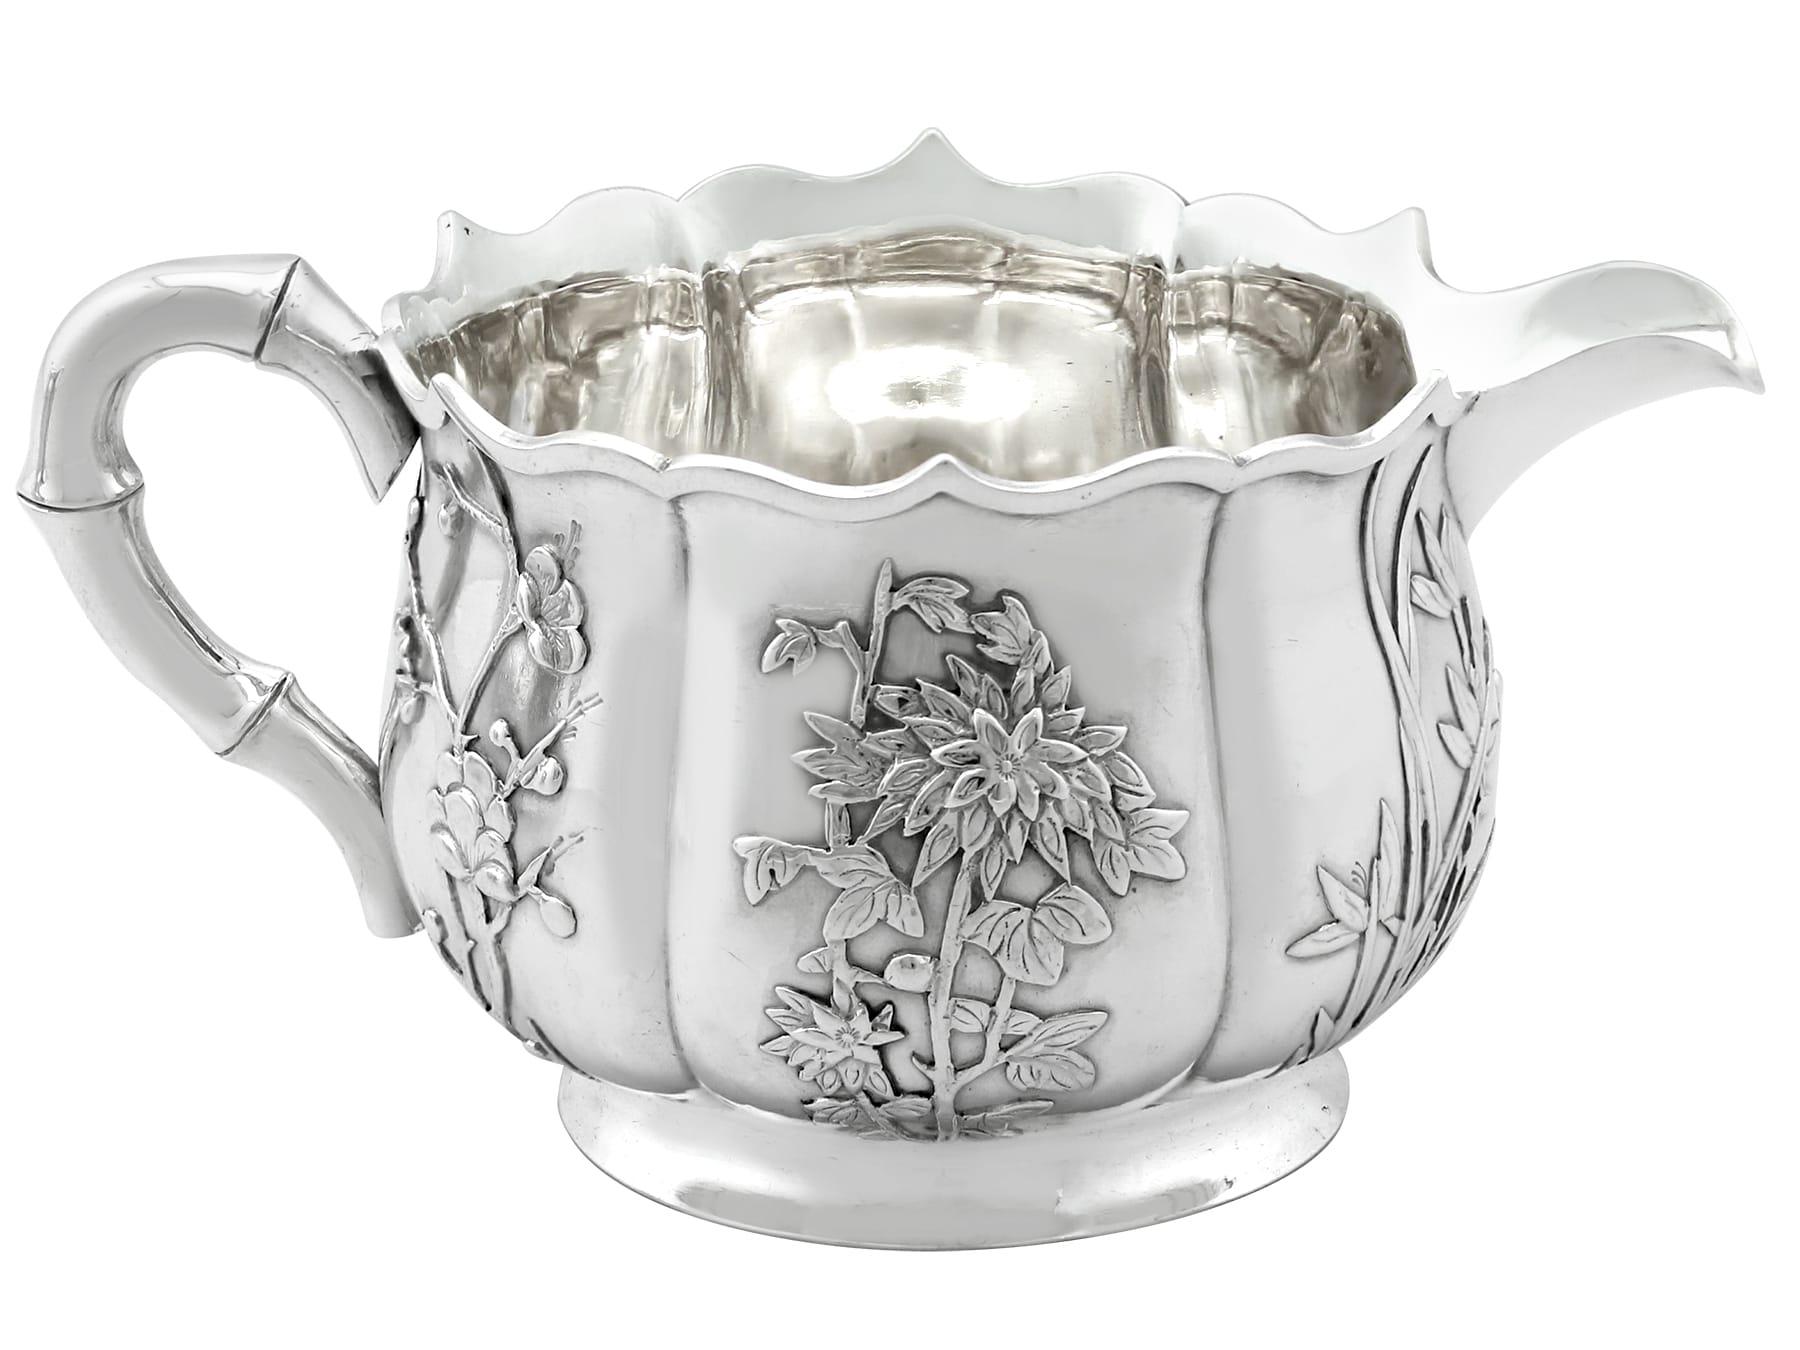 Antique Chinese Export Silver Cream Jug and Sugar Bowl In Excellent Condition For Sale In Jesmond, Newcastle Upon Tyne